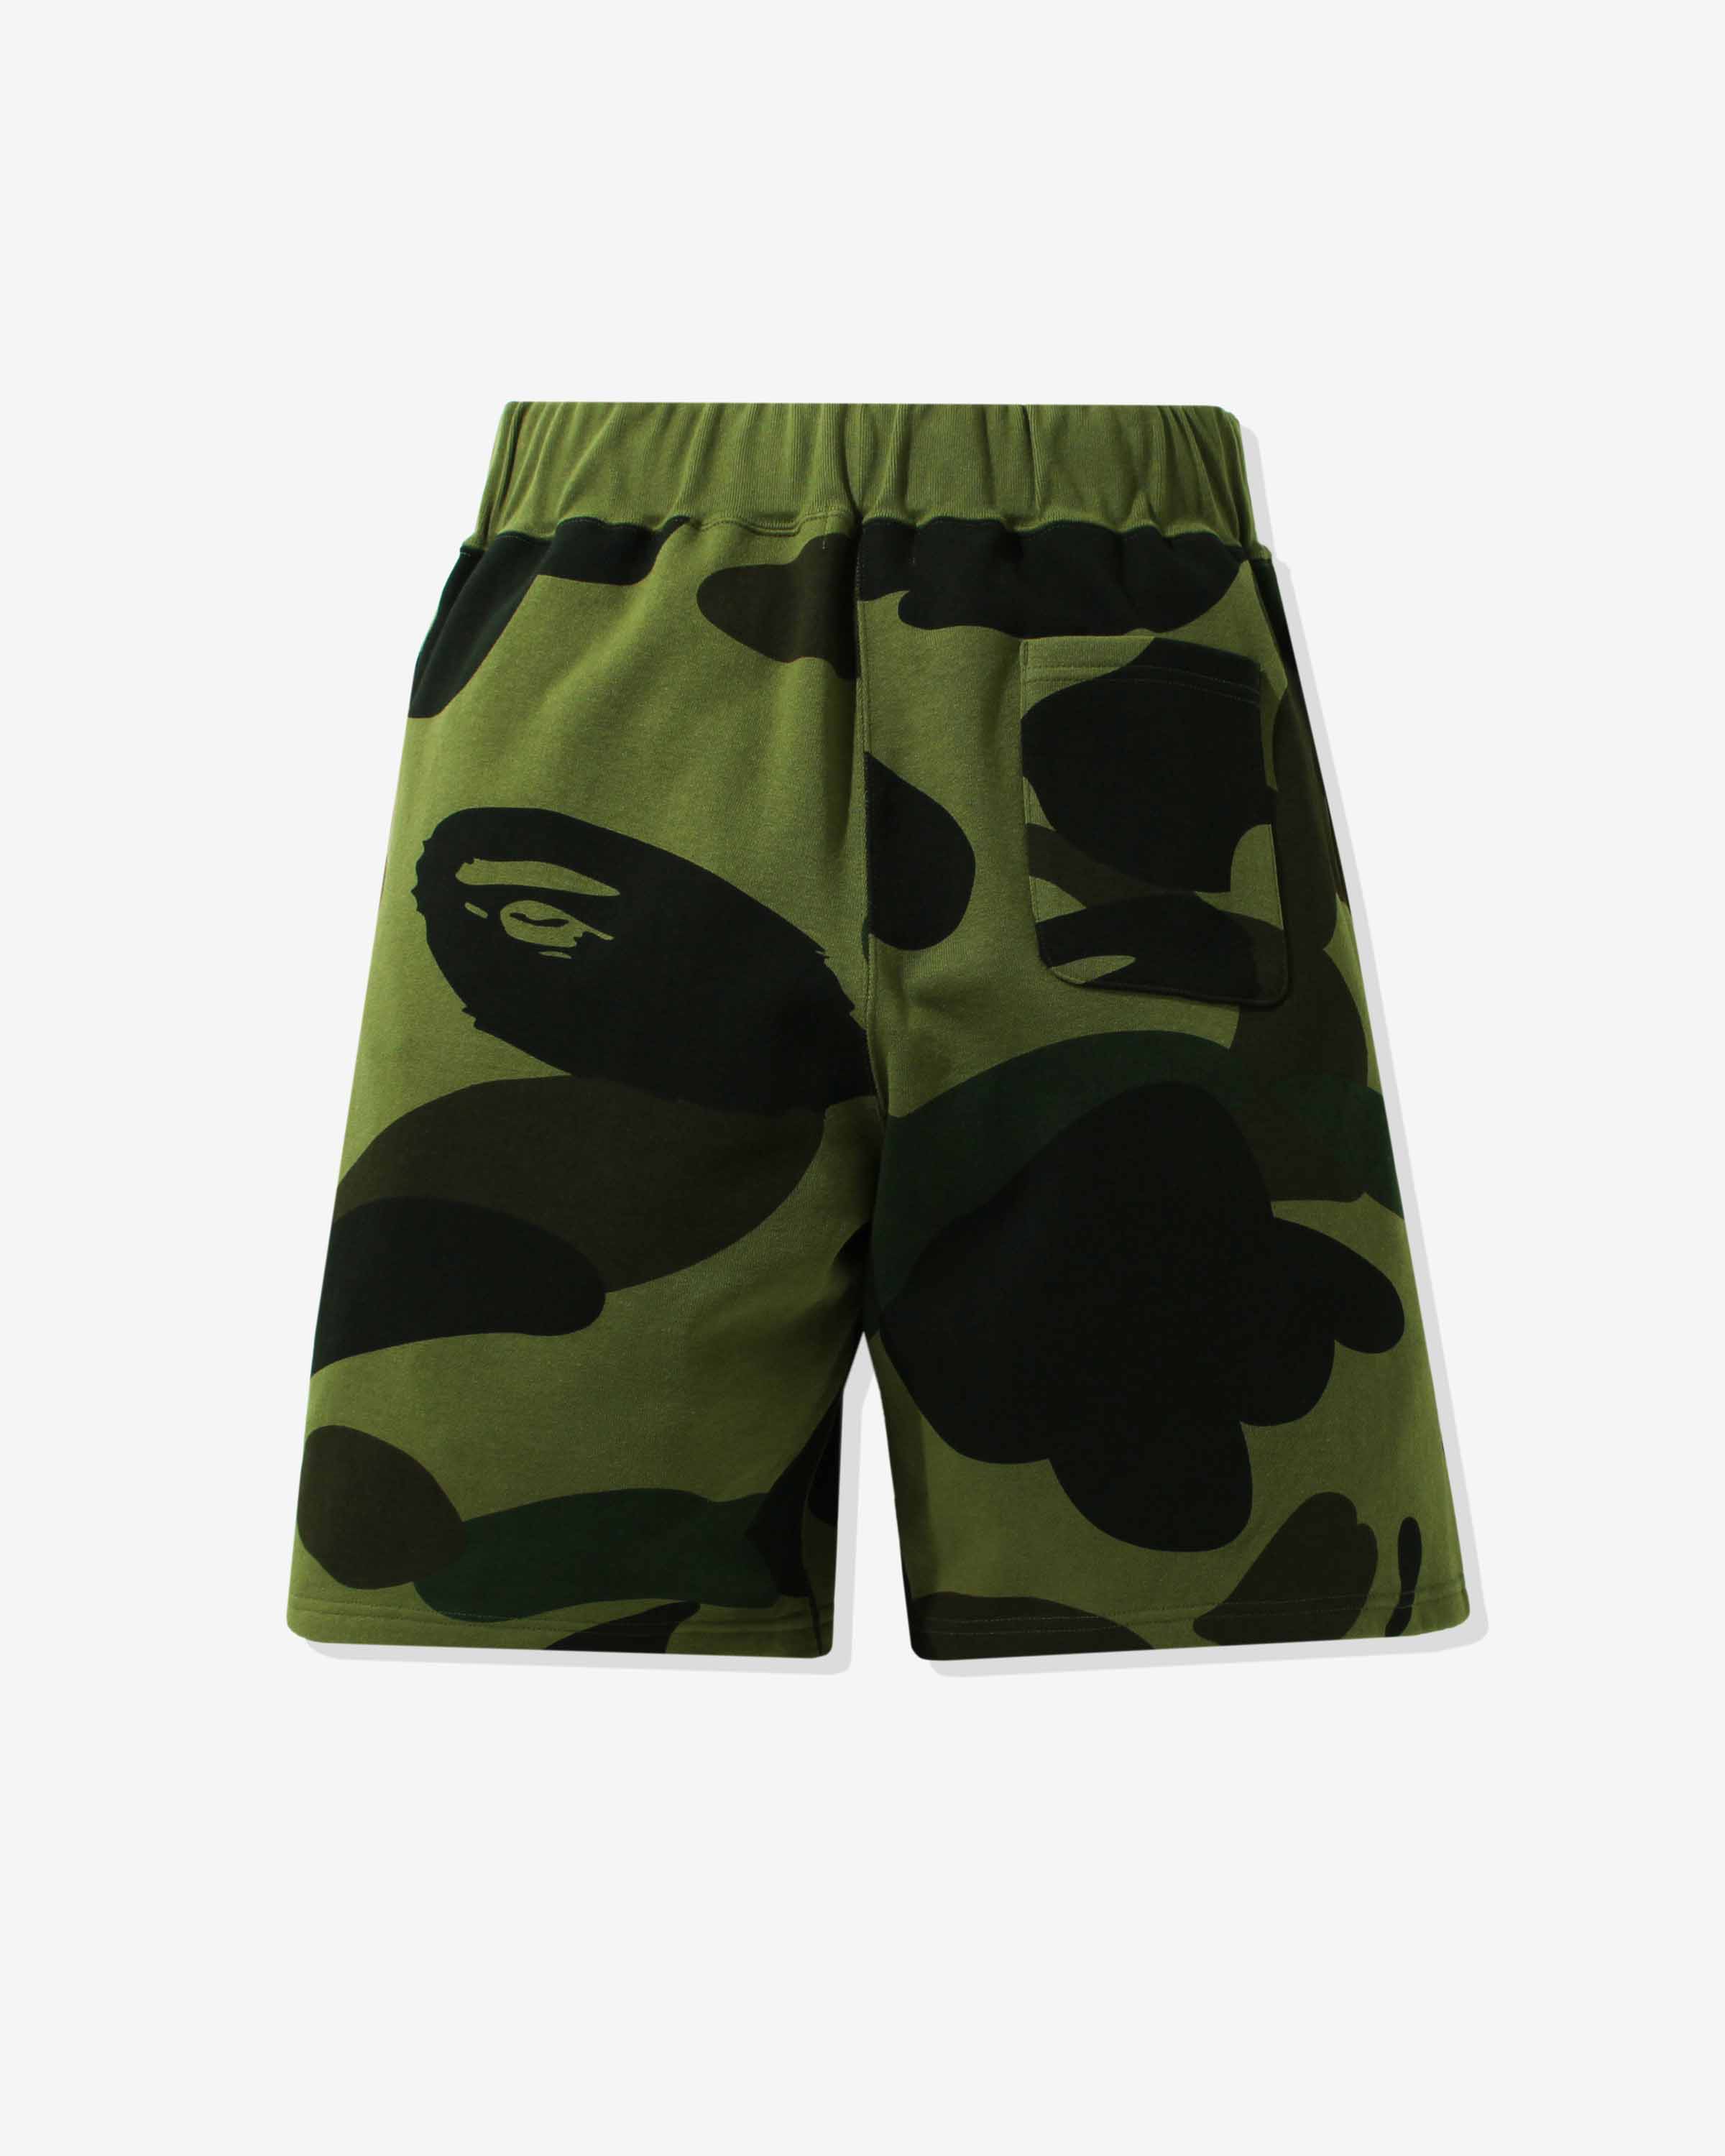 BAPE GIANT 1ST SHORTS – WIDE SWEAT FIT Undefeated CAMO